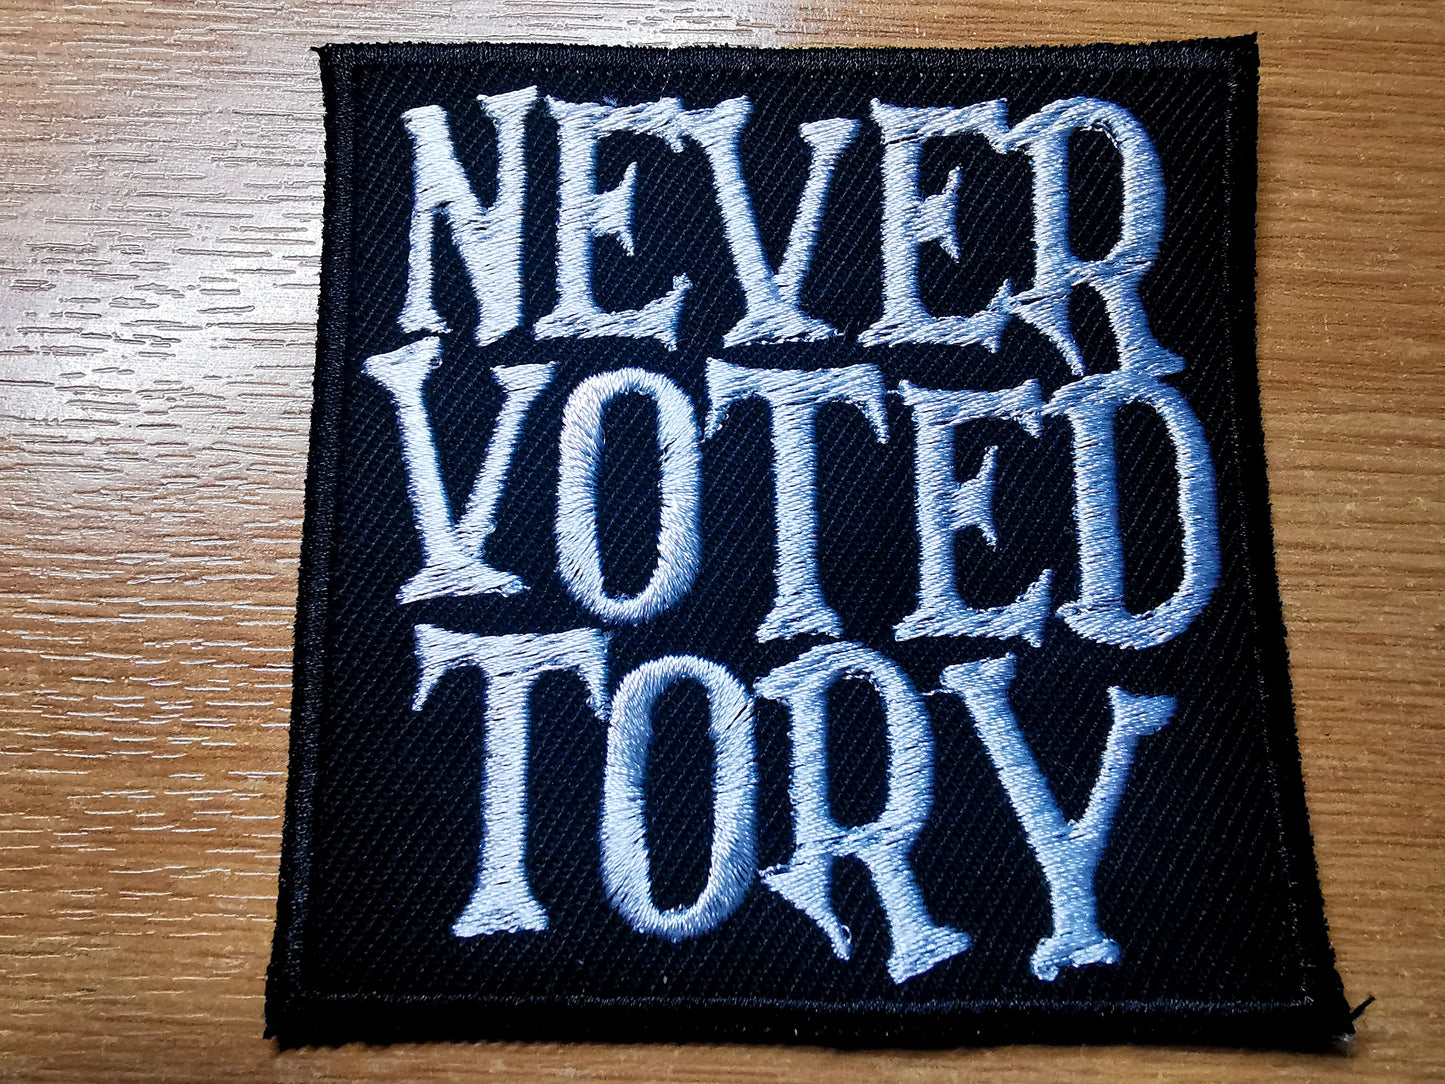 Never Voted Tory Embroidered Patch